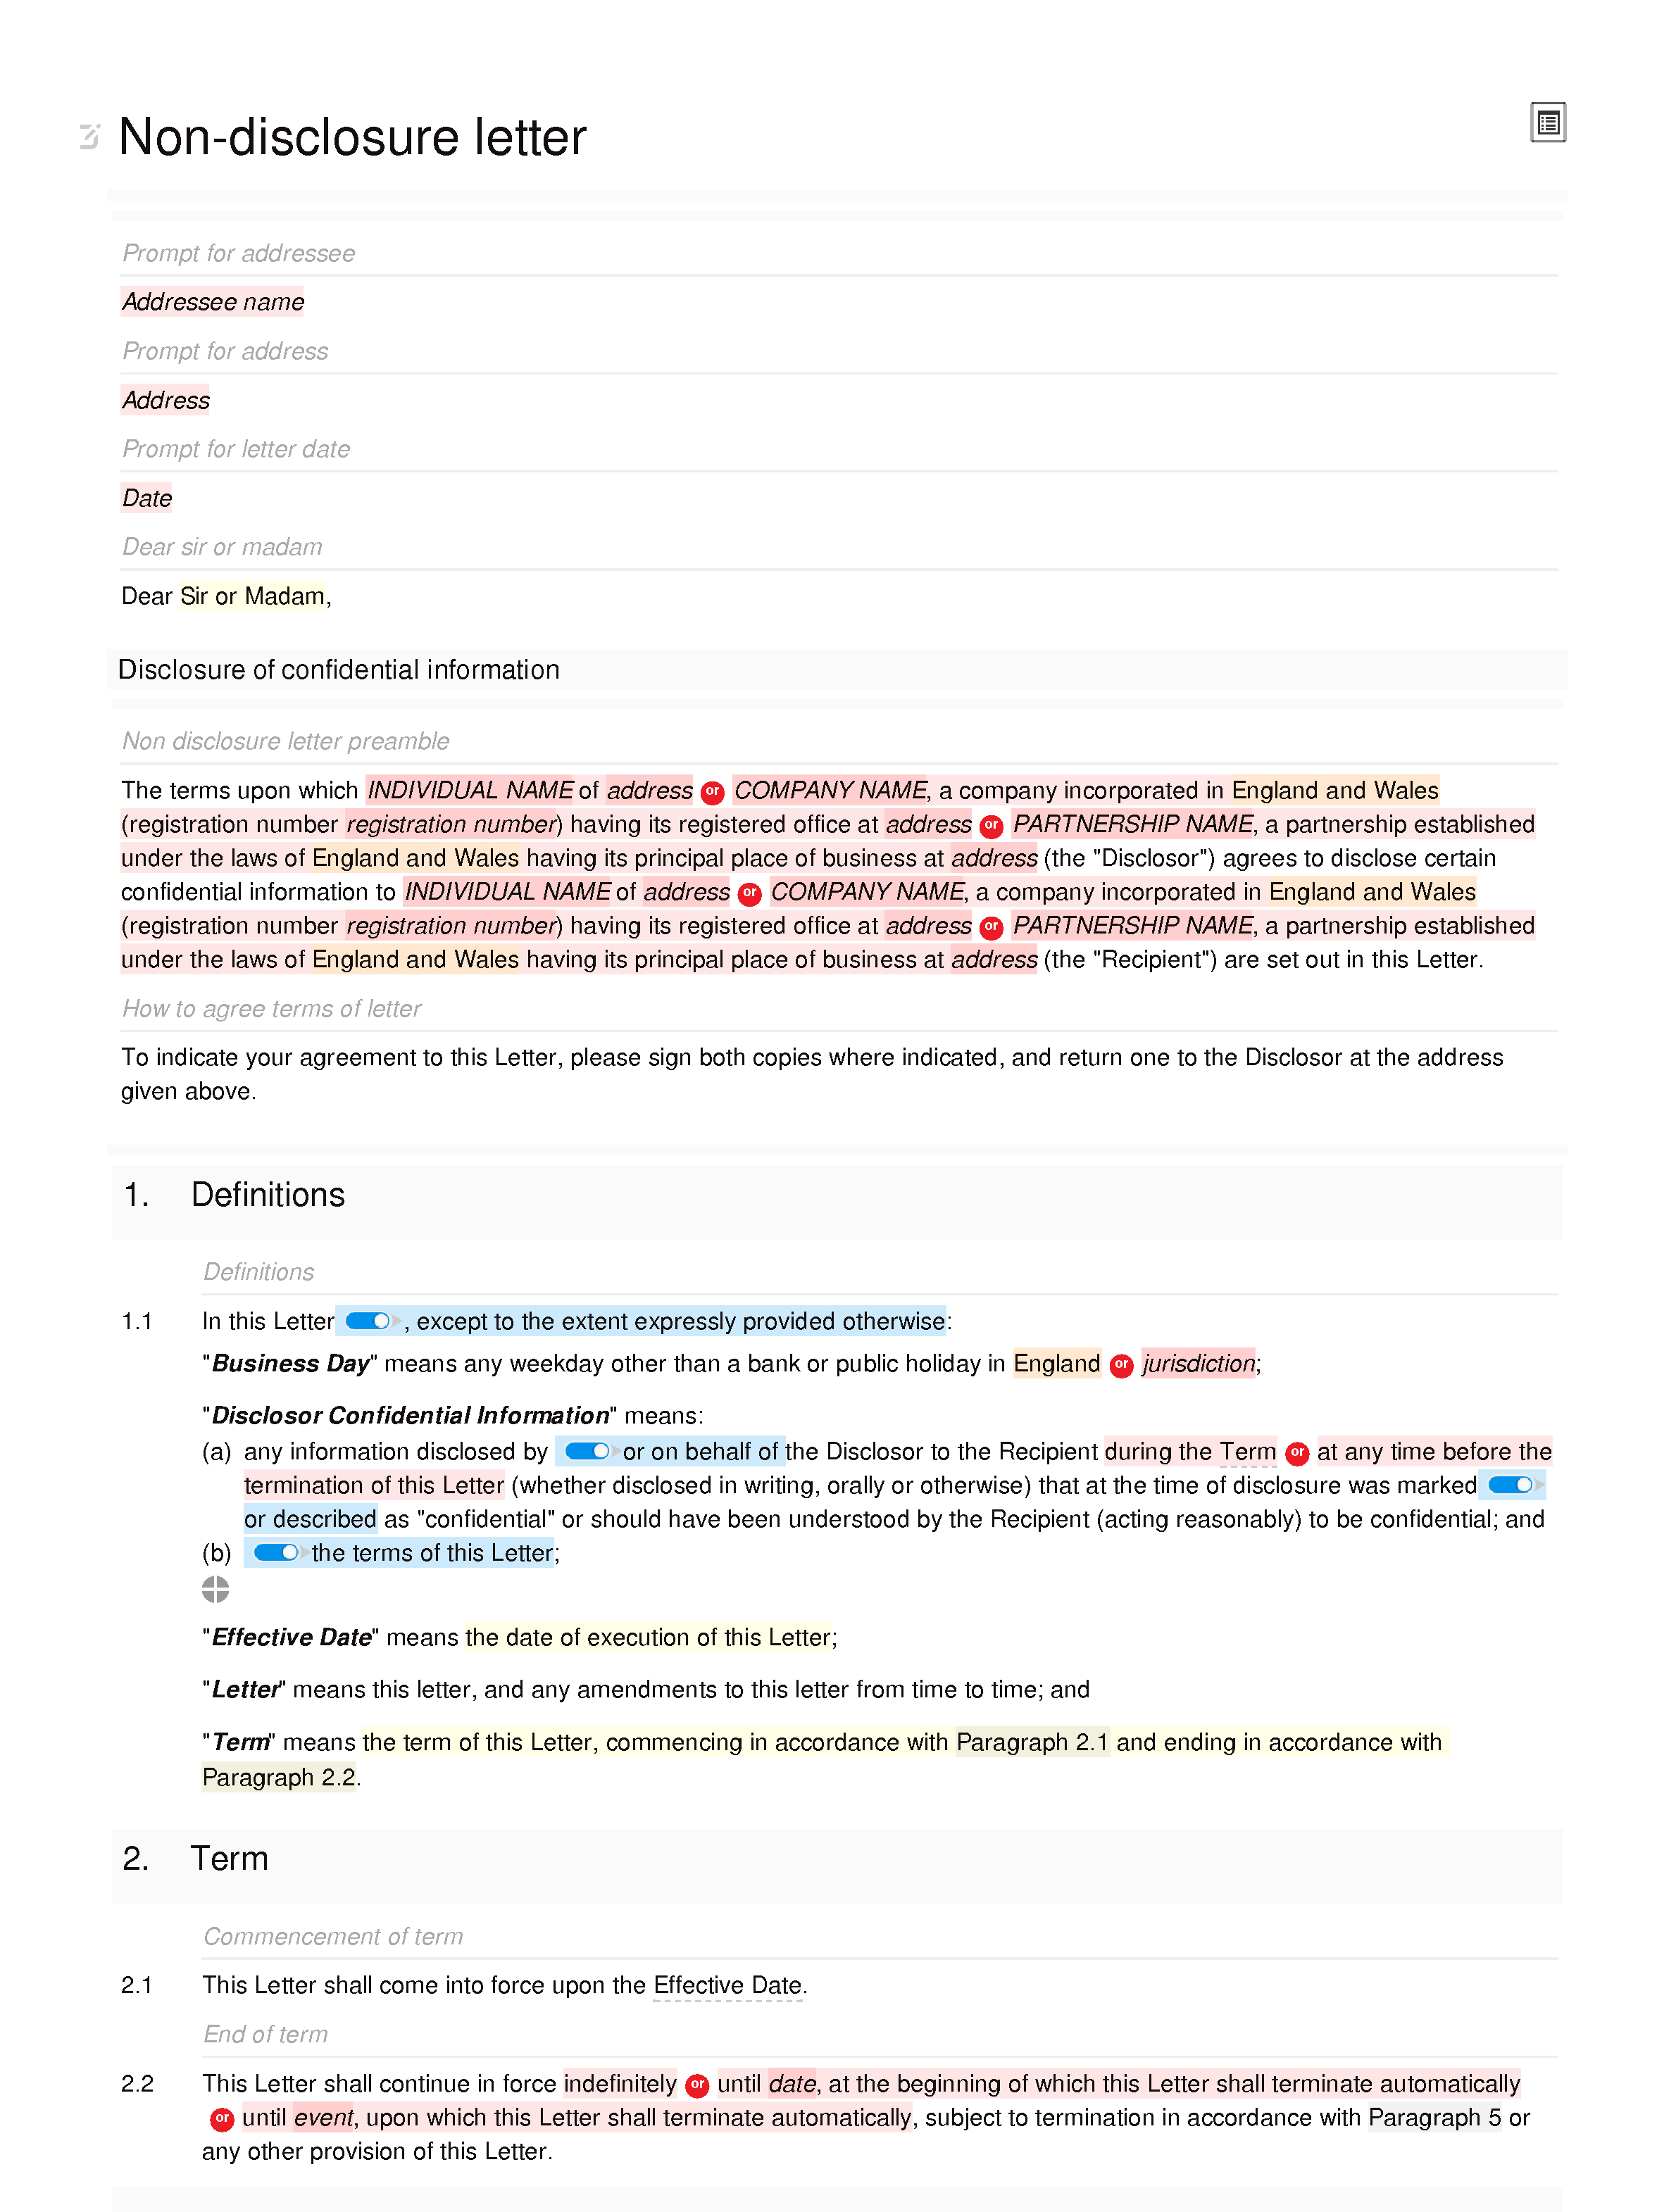 Non-disclosure letter (unilateral, standard) document editor preview